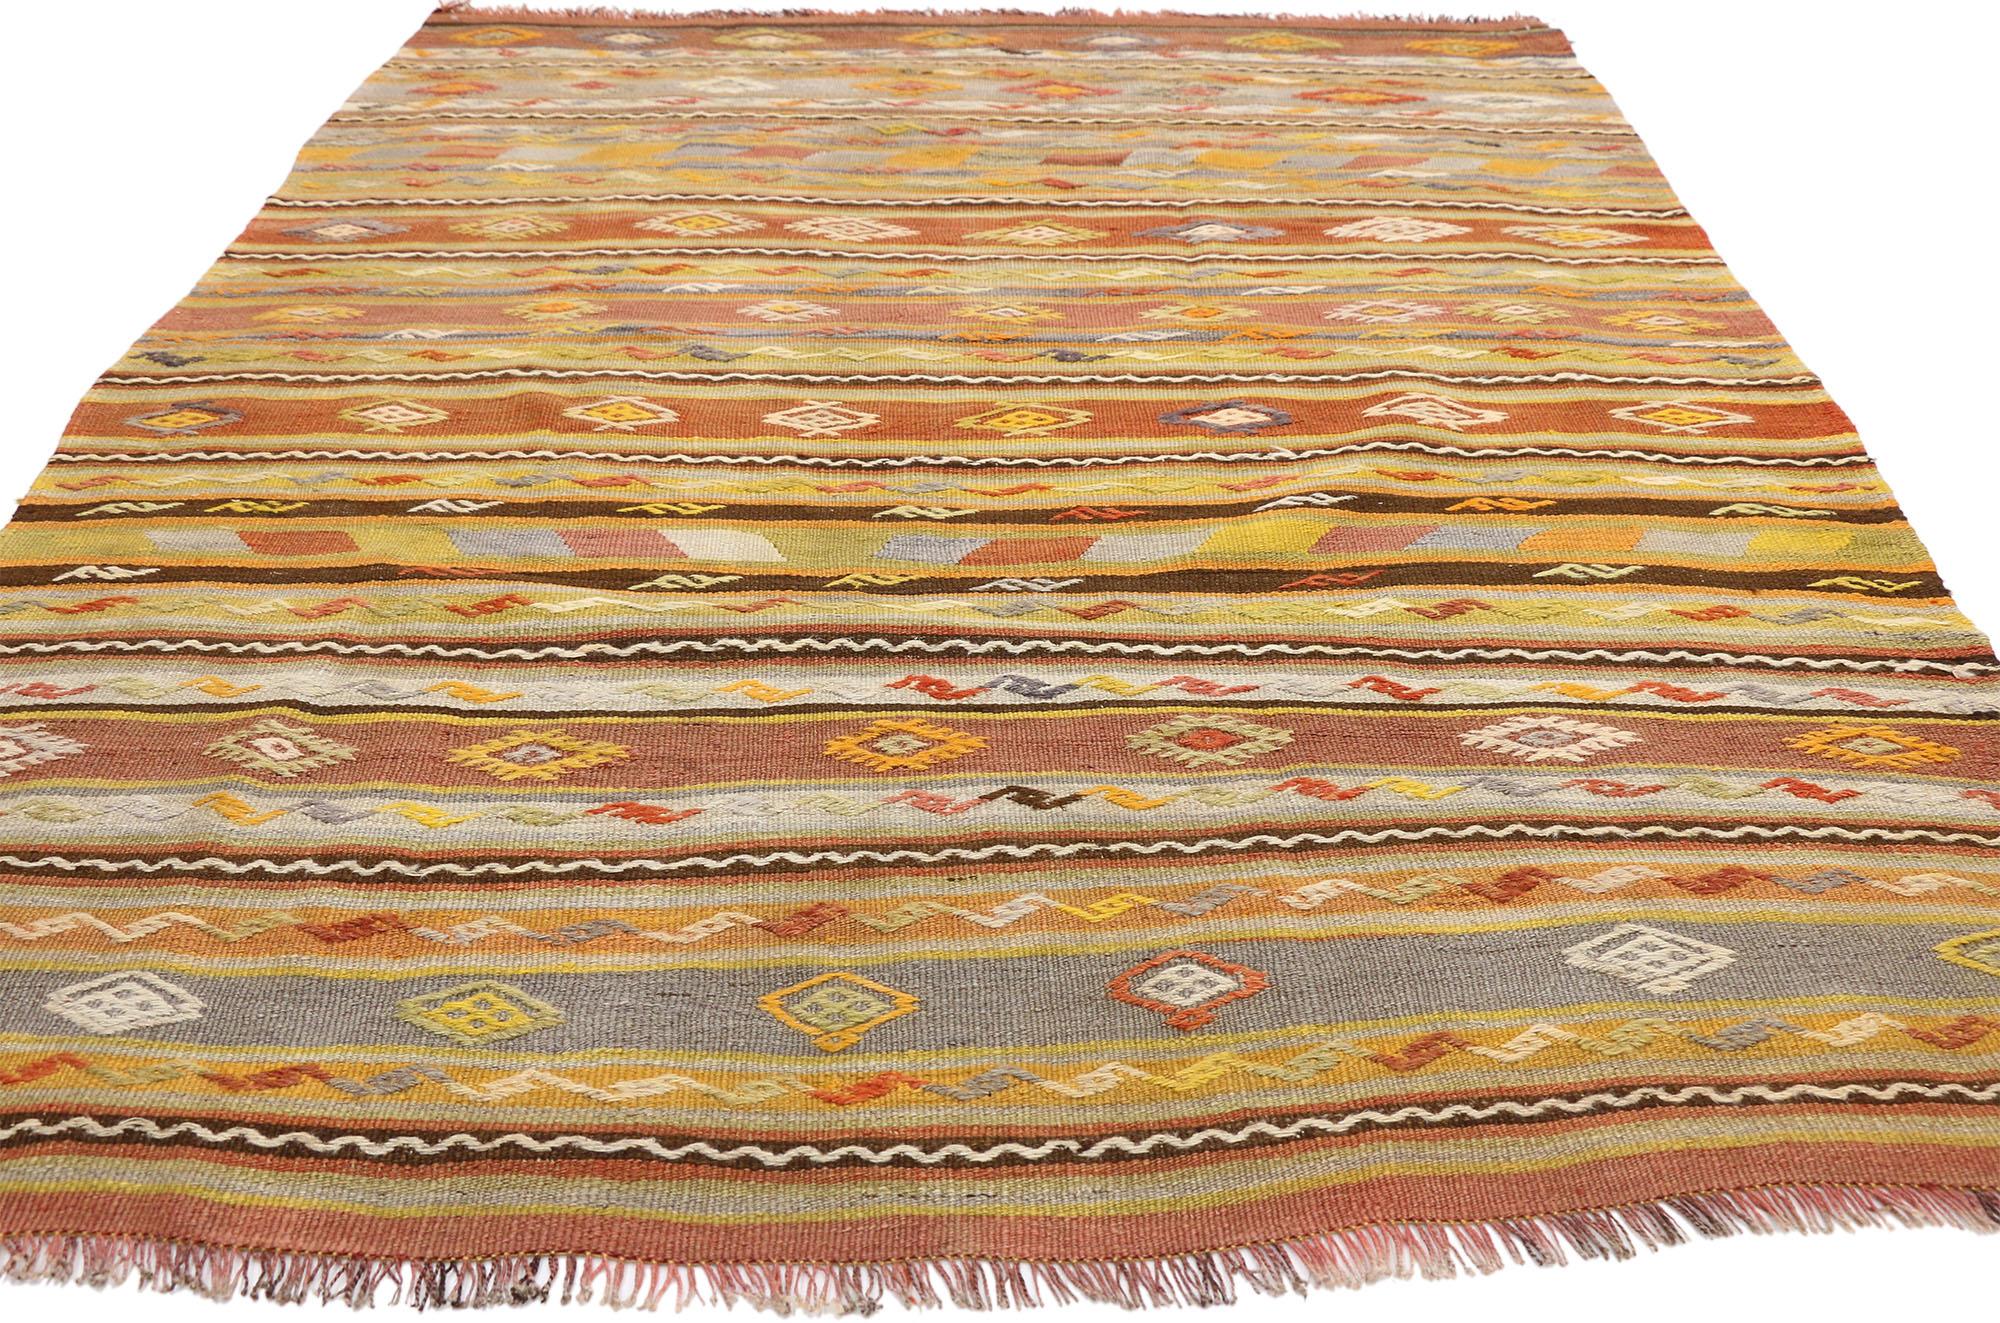 Wool Vintage Turkish Striped Kilim Rug with Modern Boho Chic Tribal Style For Sale